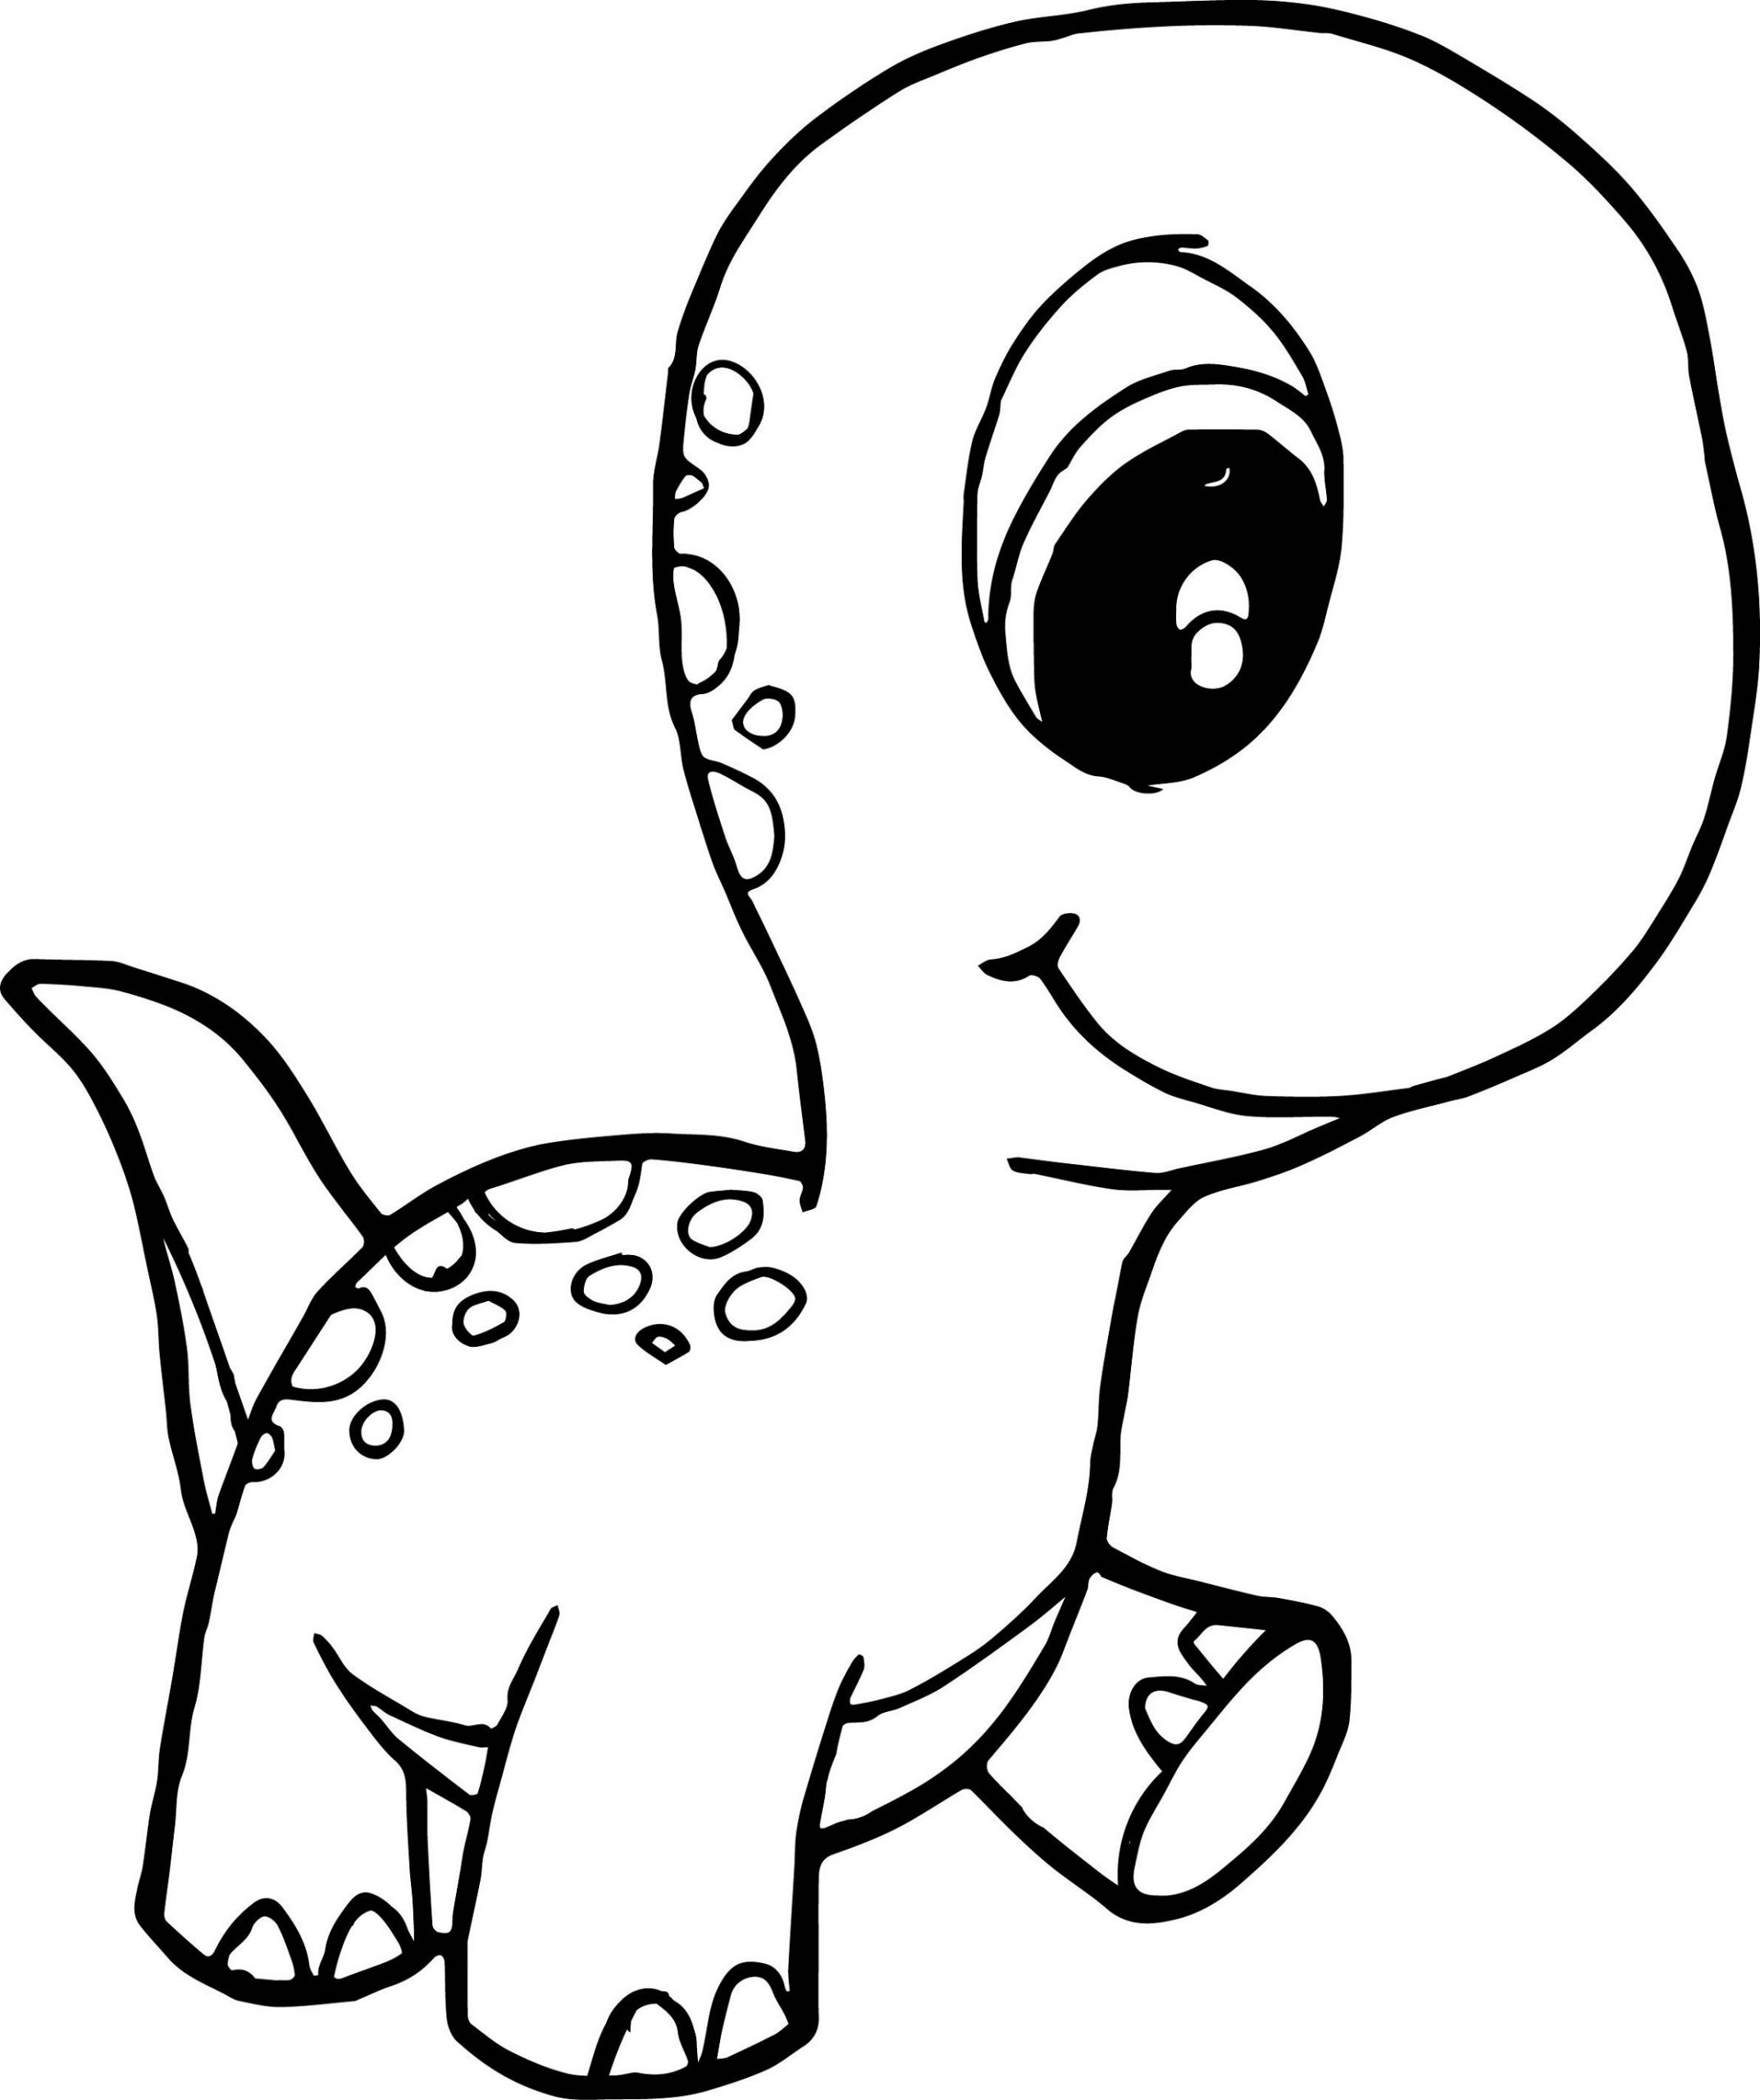 Baby Dinosaur Coloring Page
 Baby Dinosaur Coloring Pages for Preschoolers